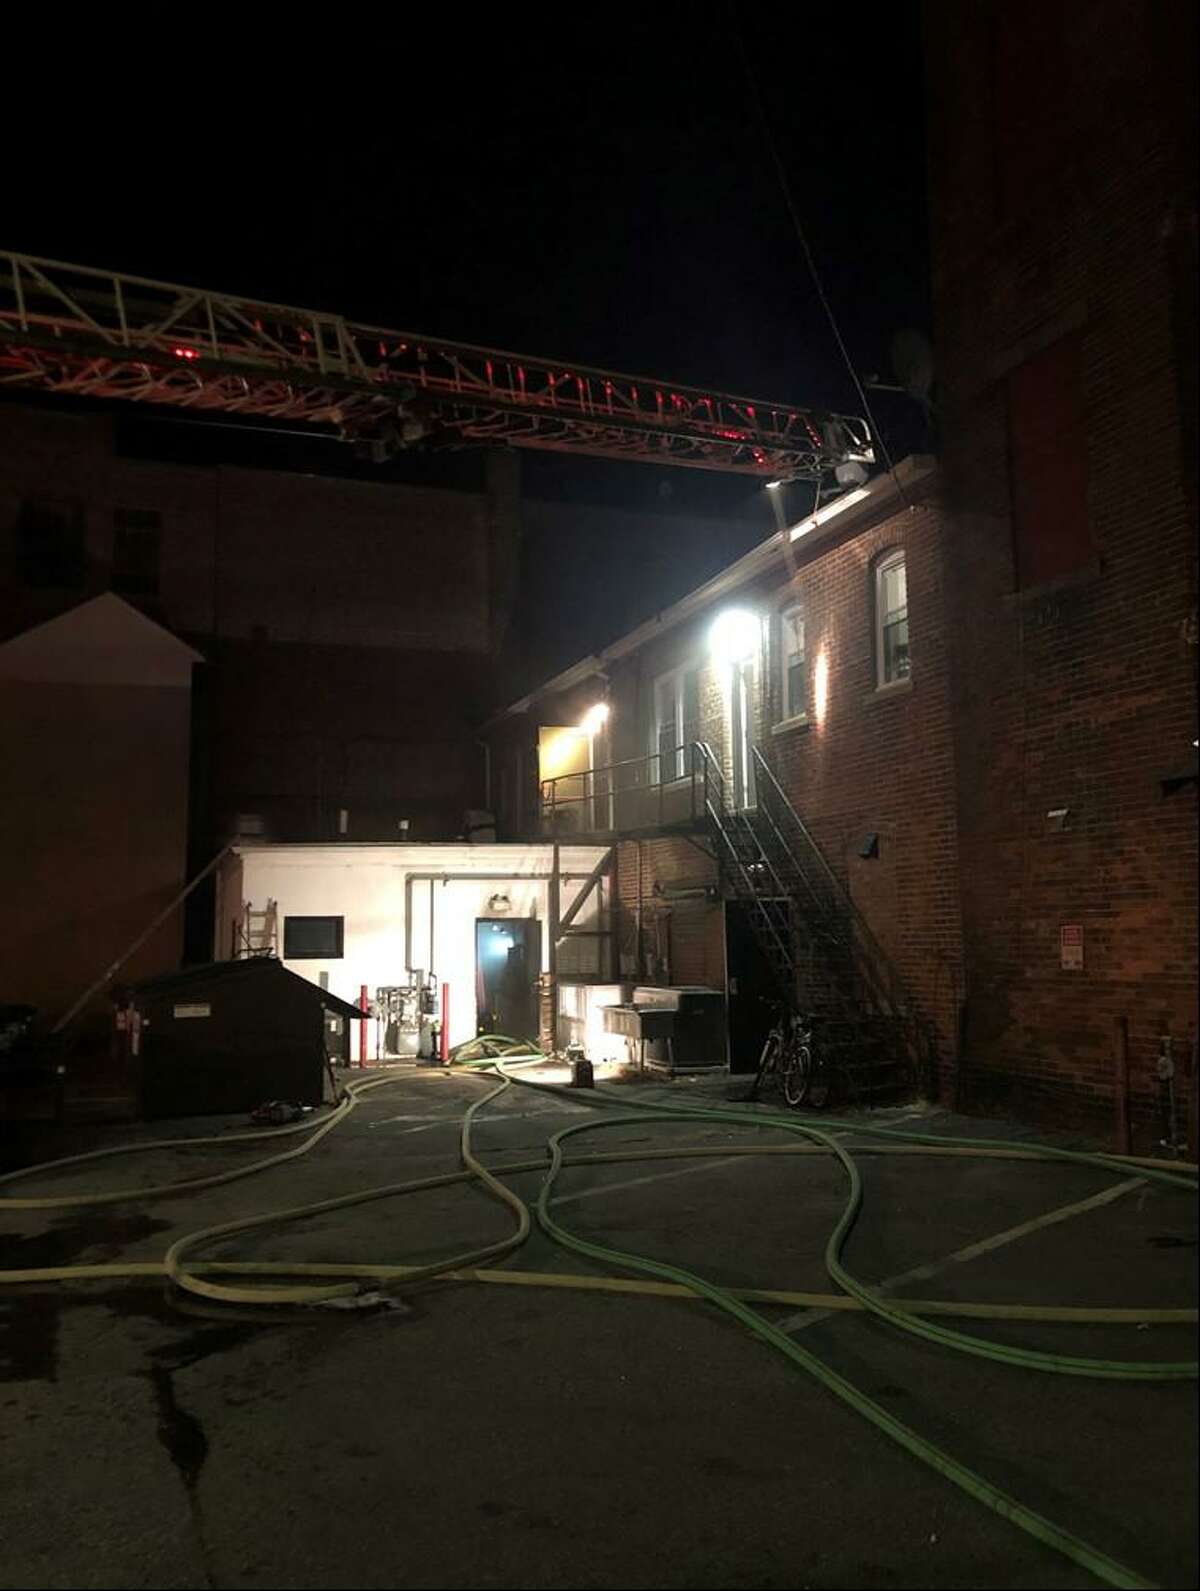 Firefighters were sent to East Main Street in Torrington, Conn., around midnight Wednesday, Dec. 2, 2021, for an activated fire alarm and found flames on the first floor.